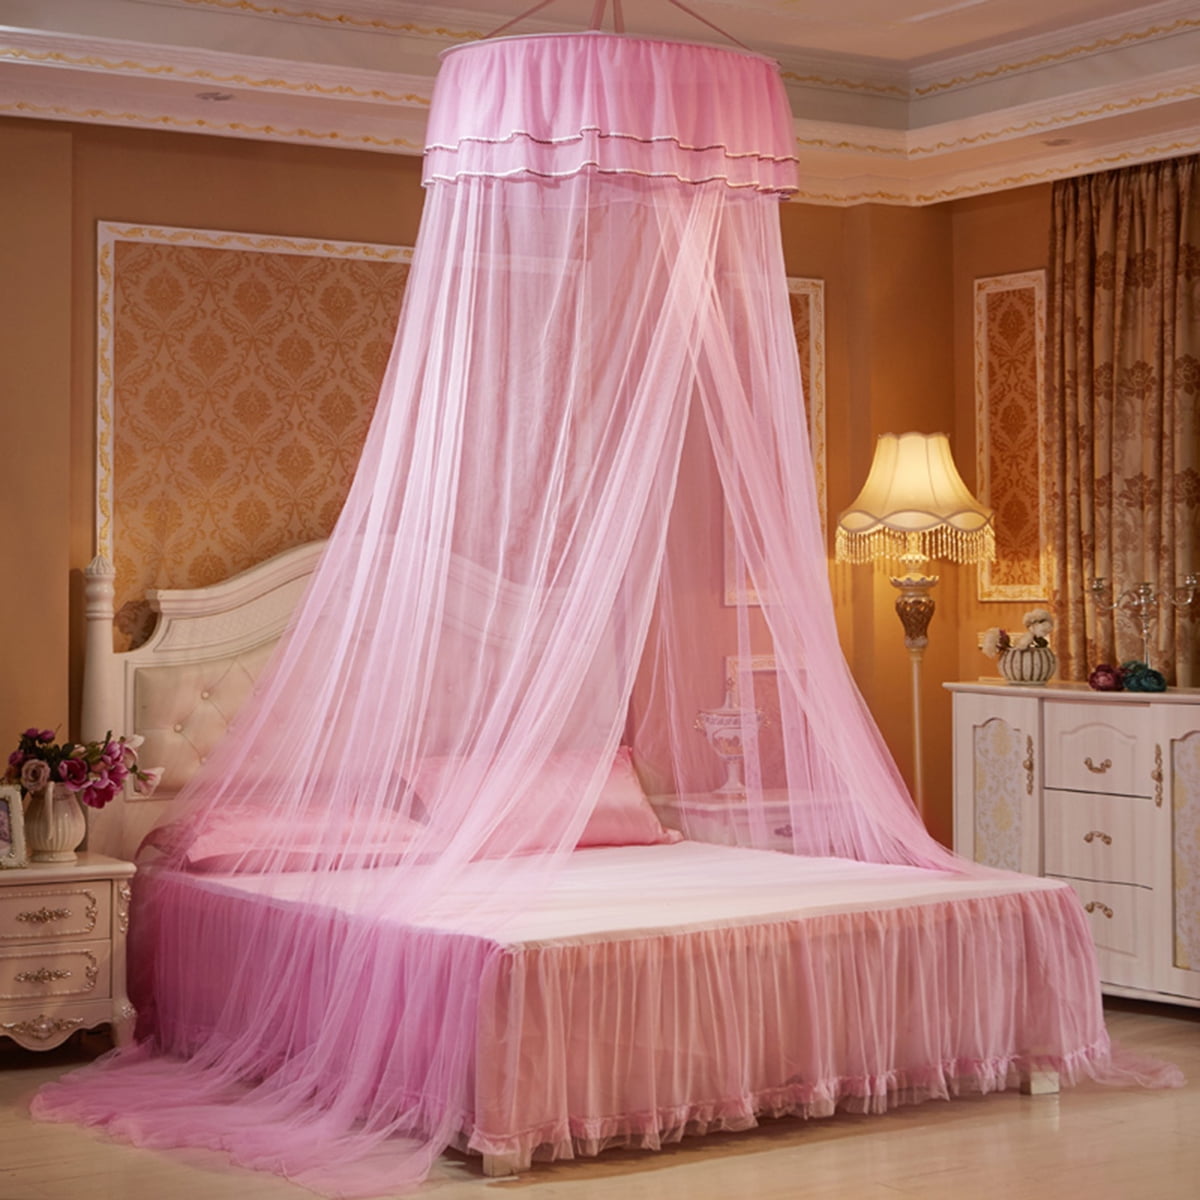 Lace Canopy Bed Curtain Dome Fly Midges Insect Cot Stopping Mosquito Net Set New 